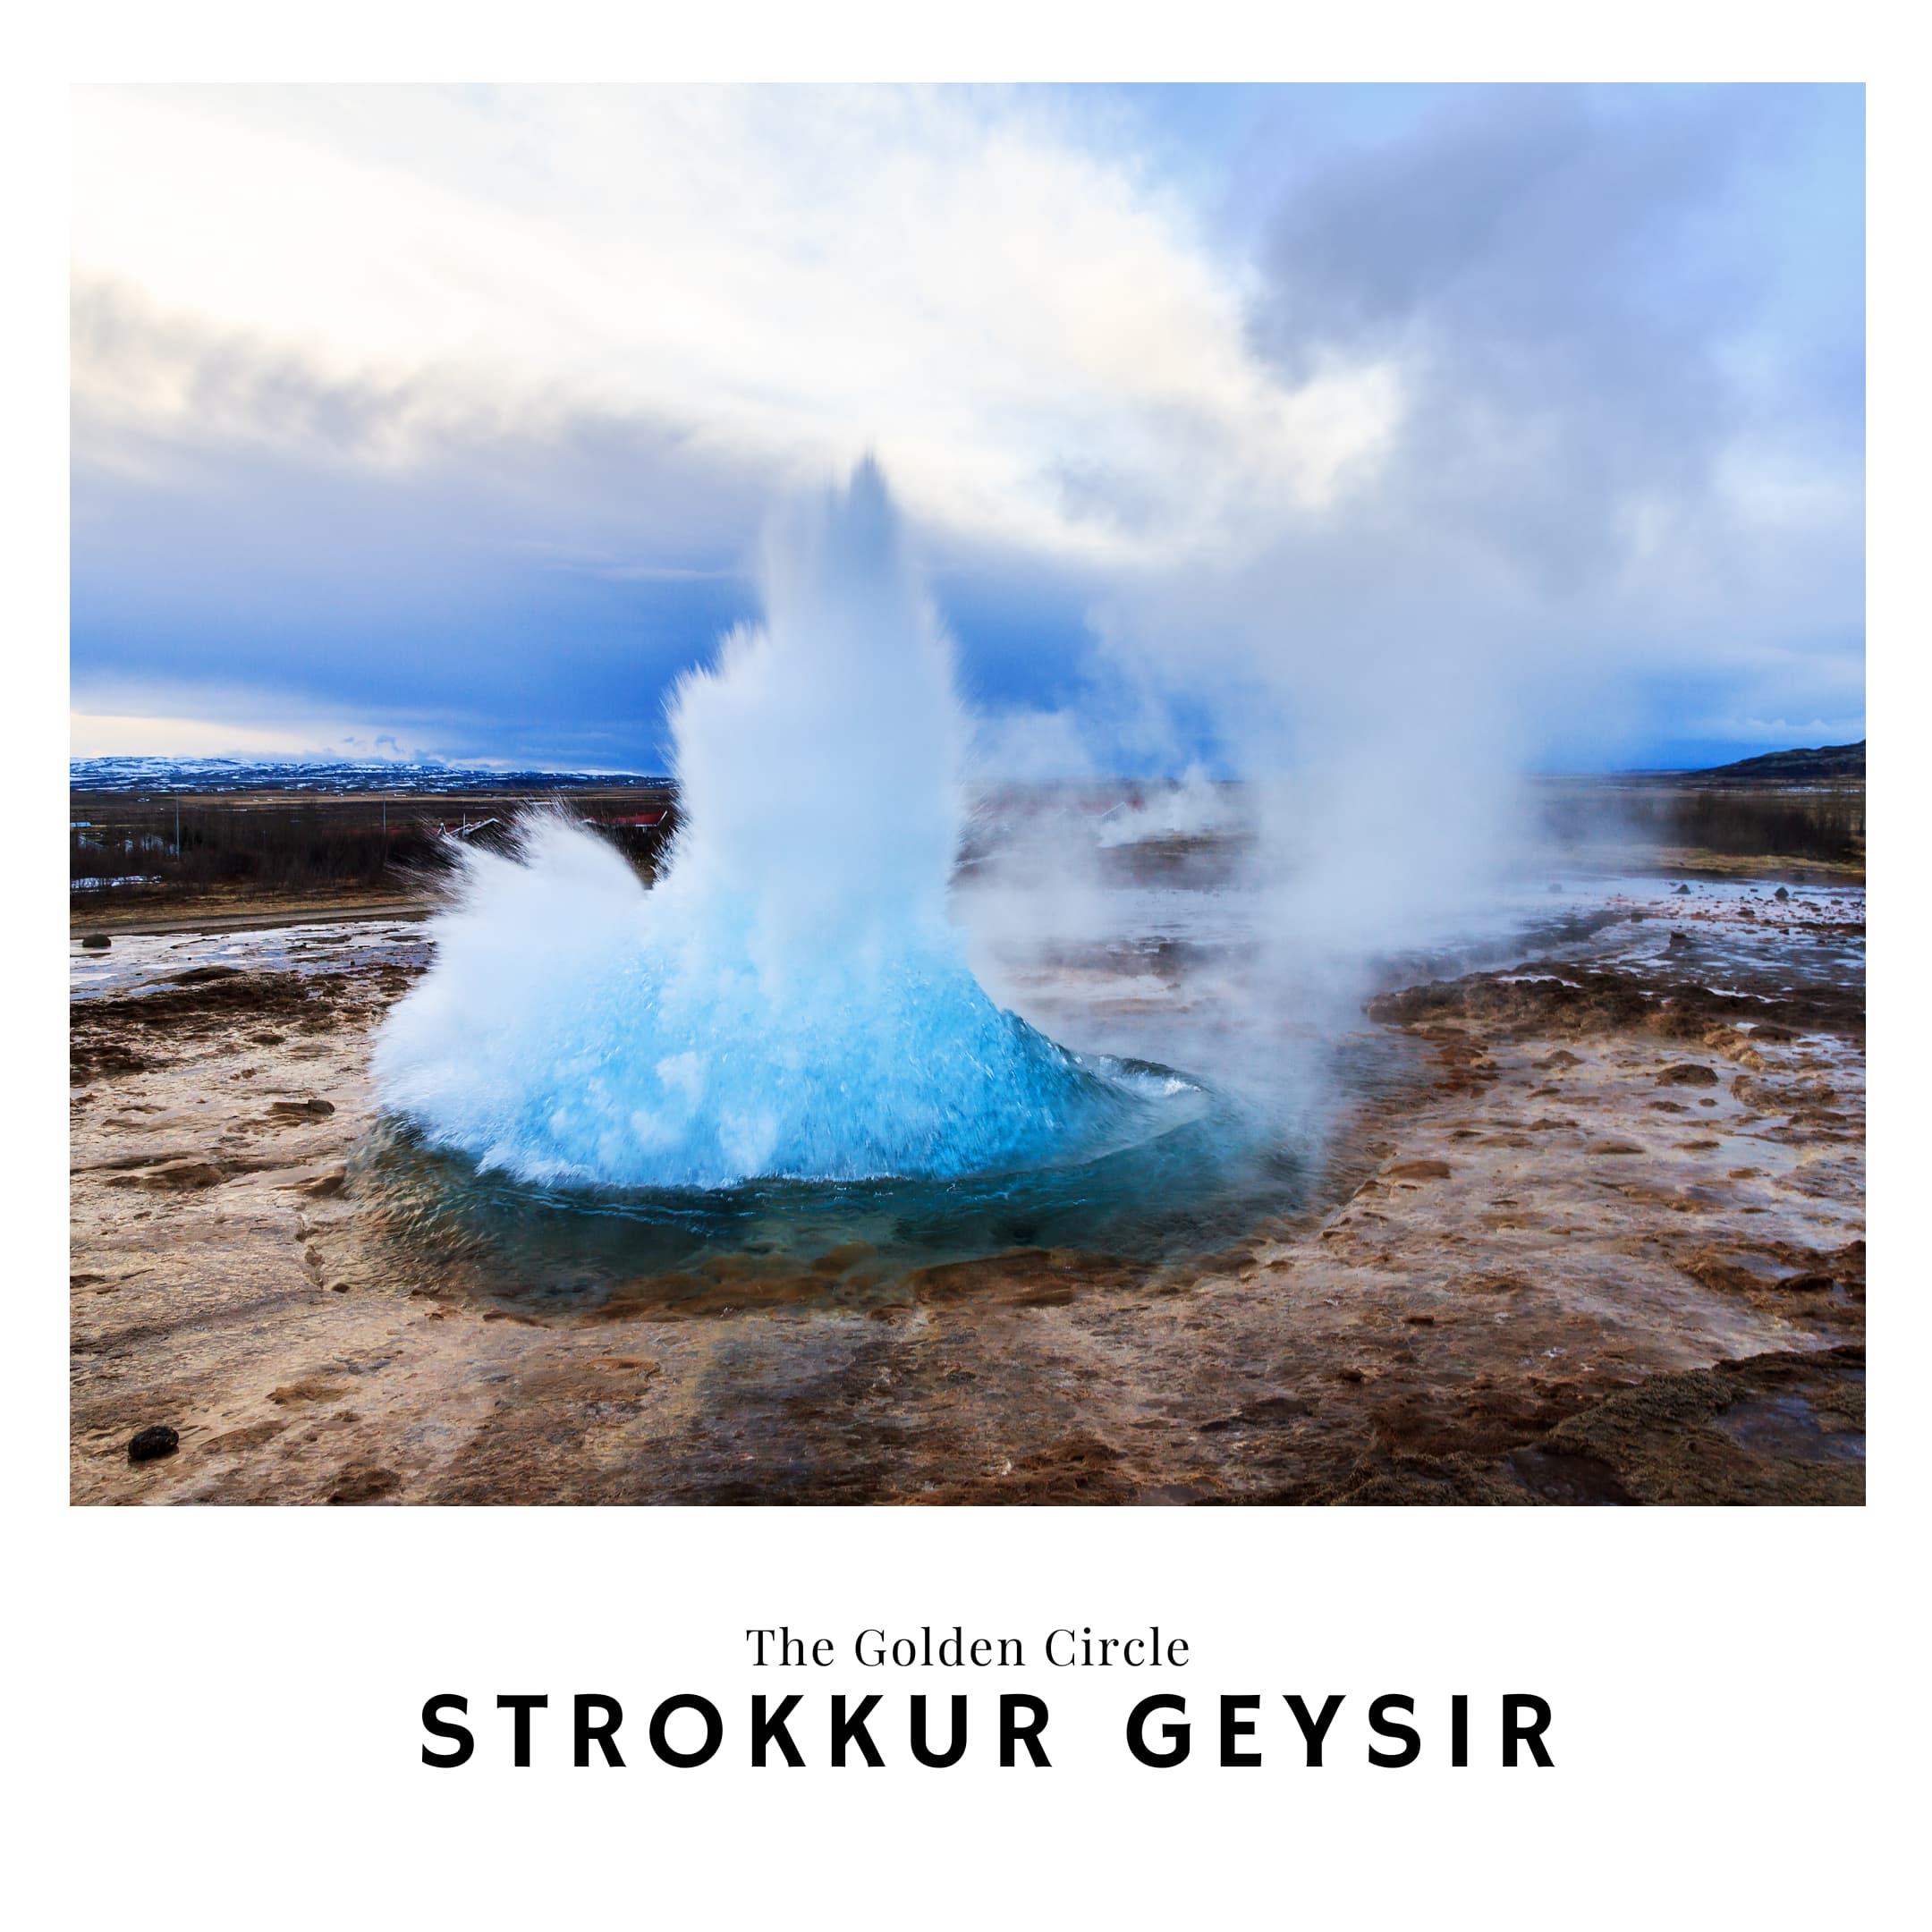 Link to the Strokkur Geysir travel guide in Icelands Golden Circle